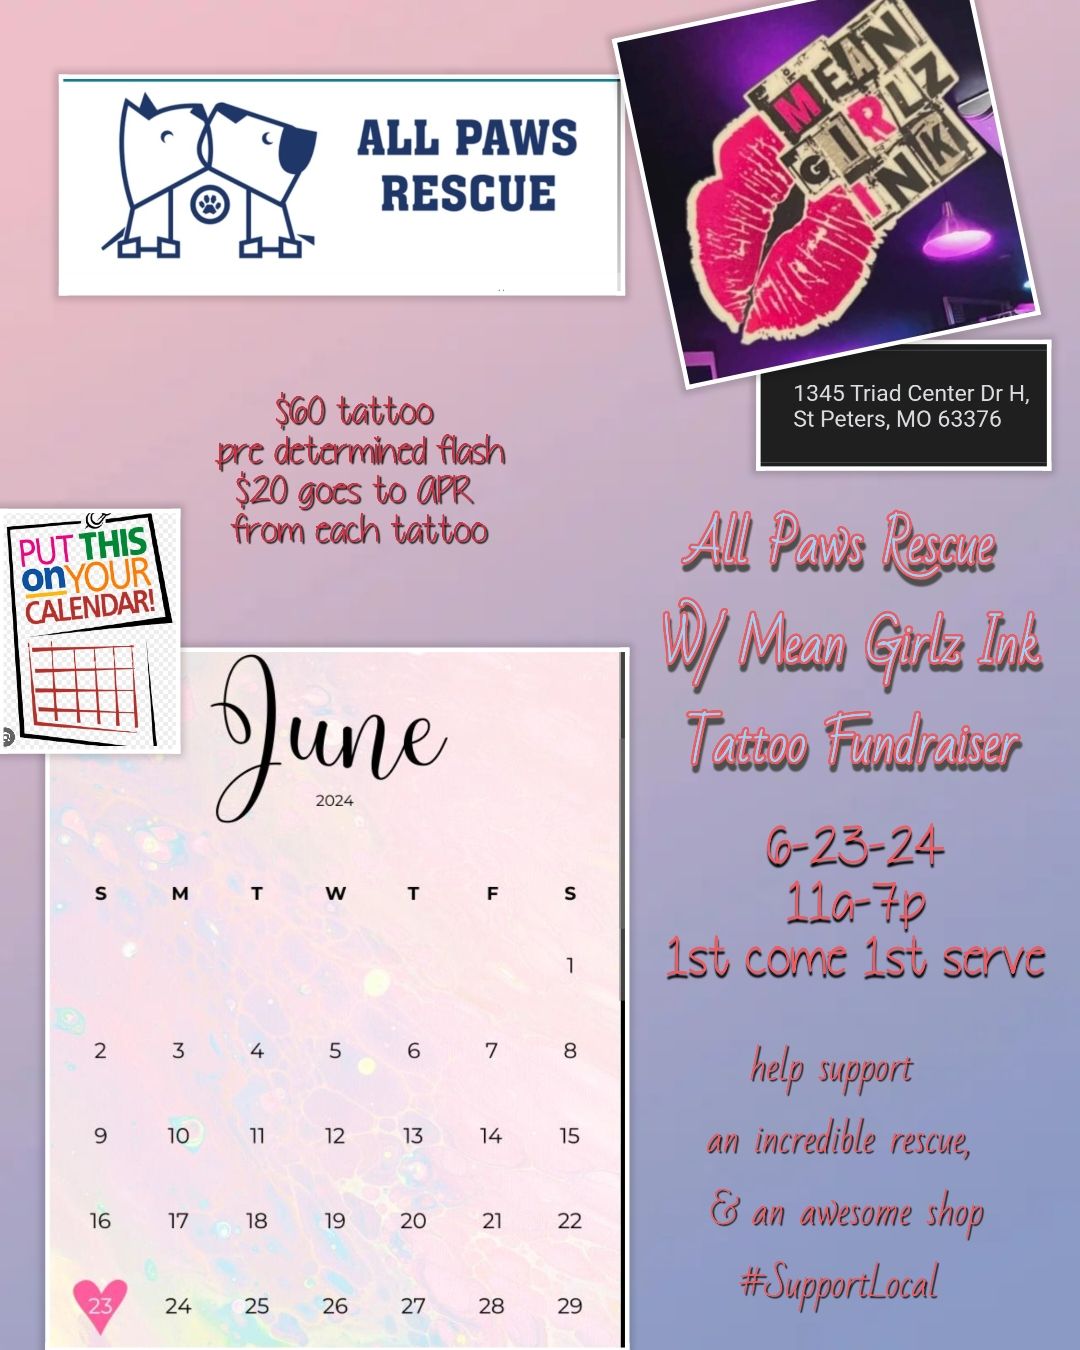 All Paws Rescue Tattoo Fundraiser w\/ Mean Girlz Ink 